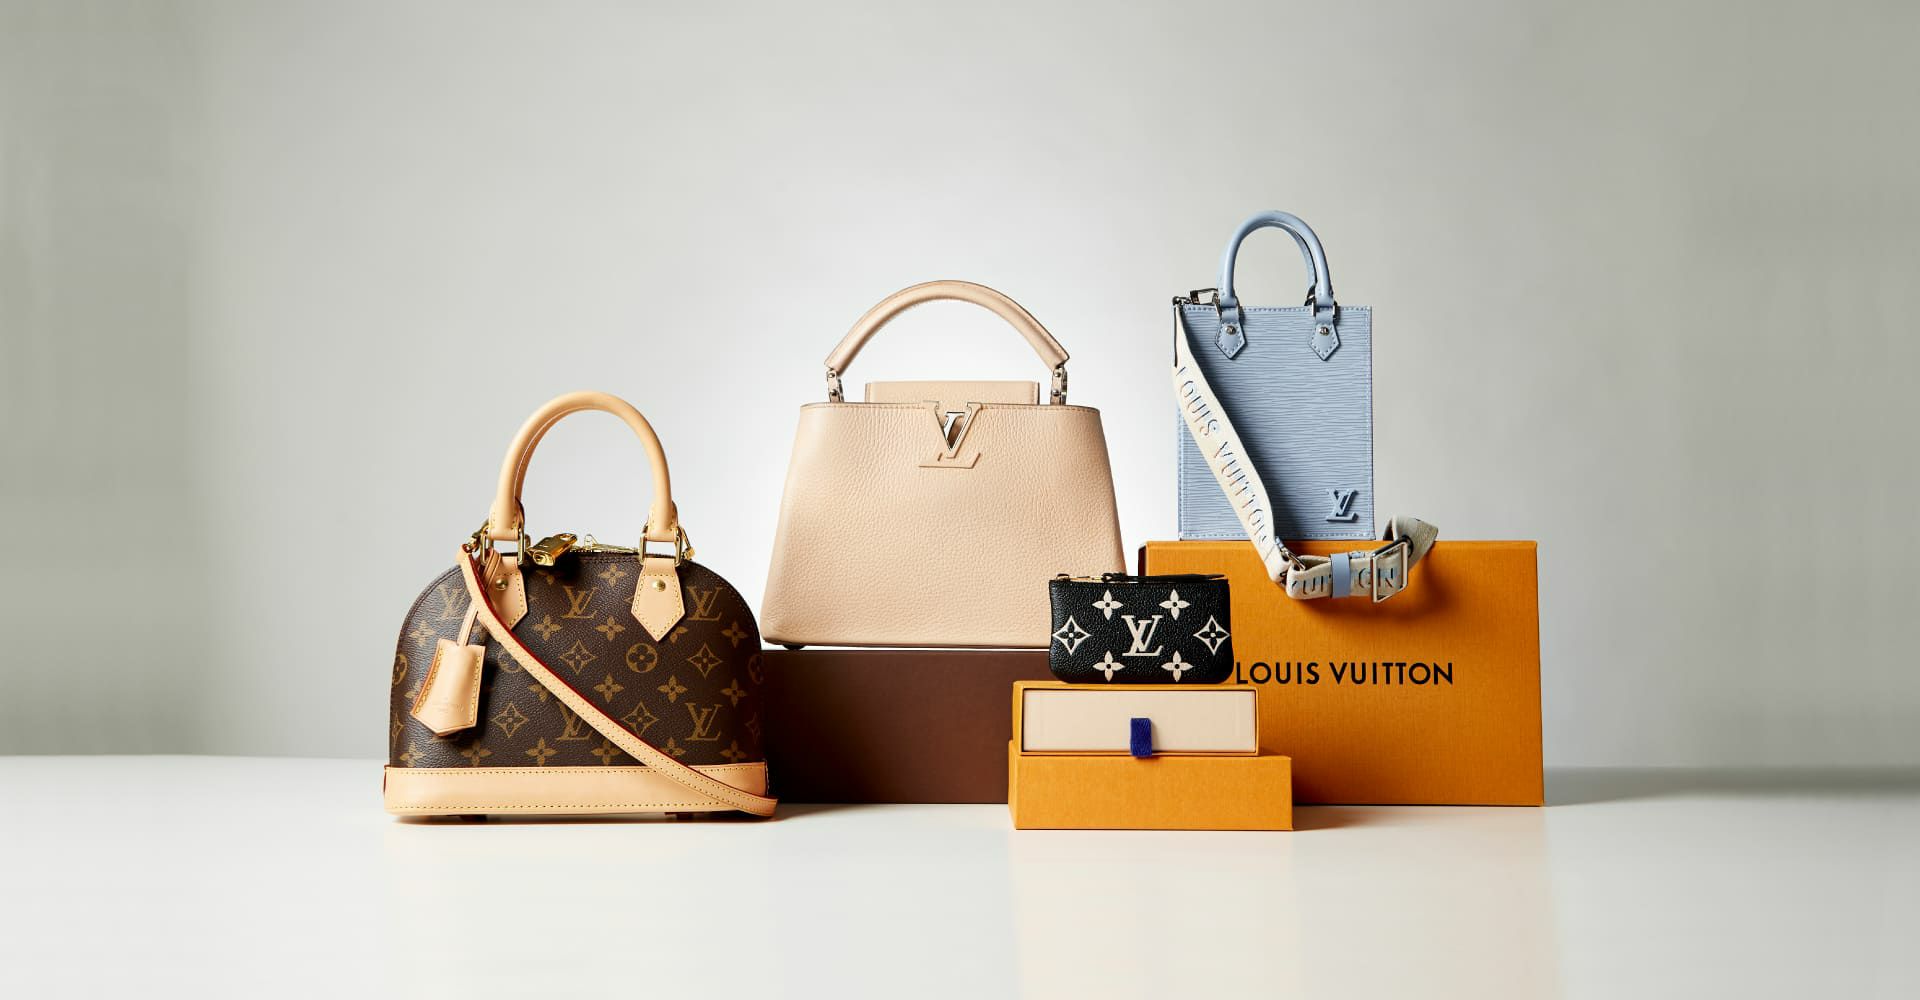 Buy Louis Vuitton LV Escale Onthego GM Pastel Tote Bags Limited Edition Purse  Handbags at Amazon.in